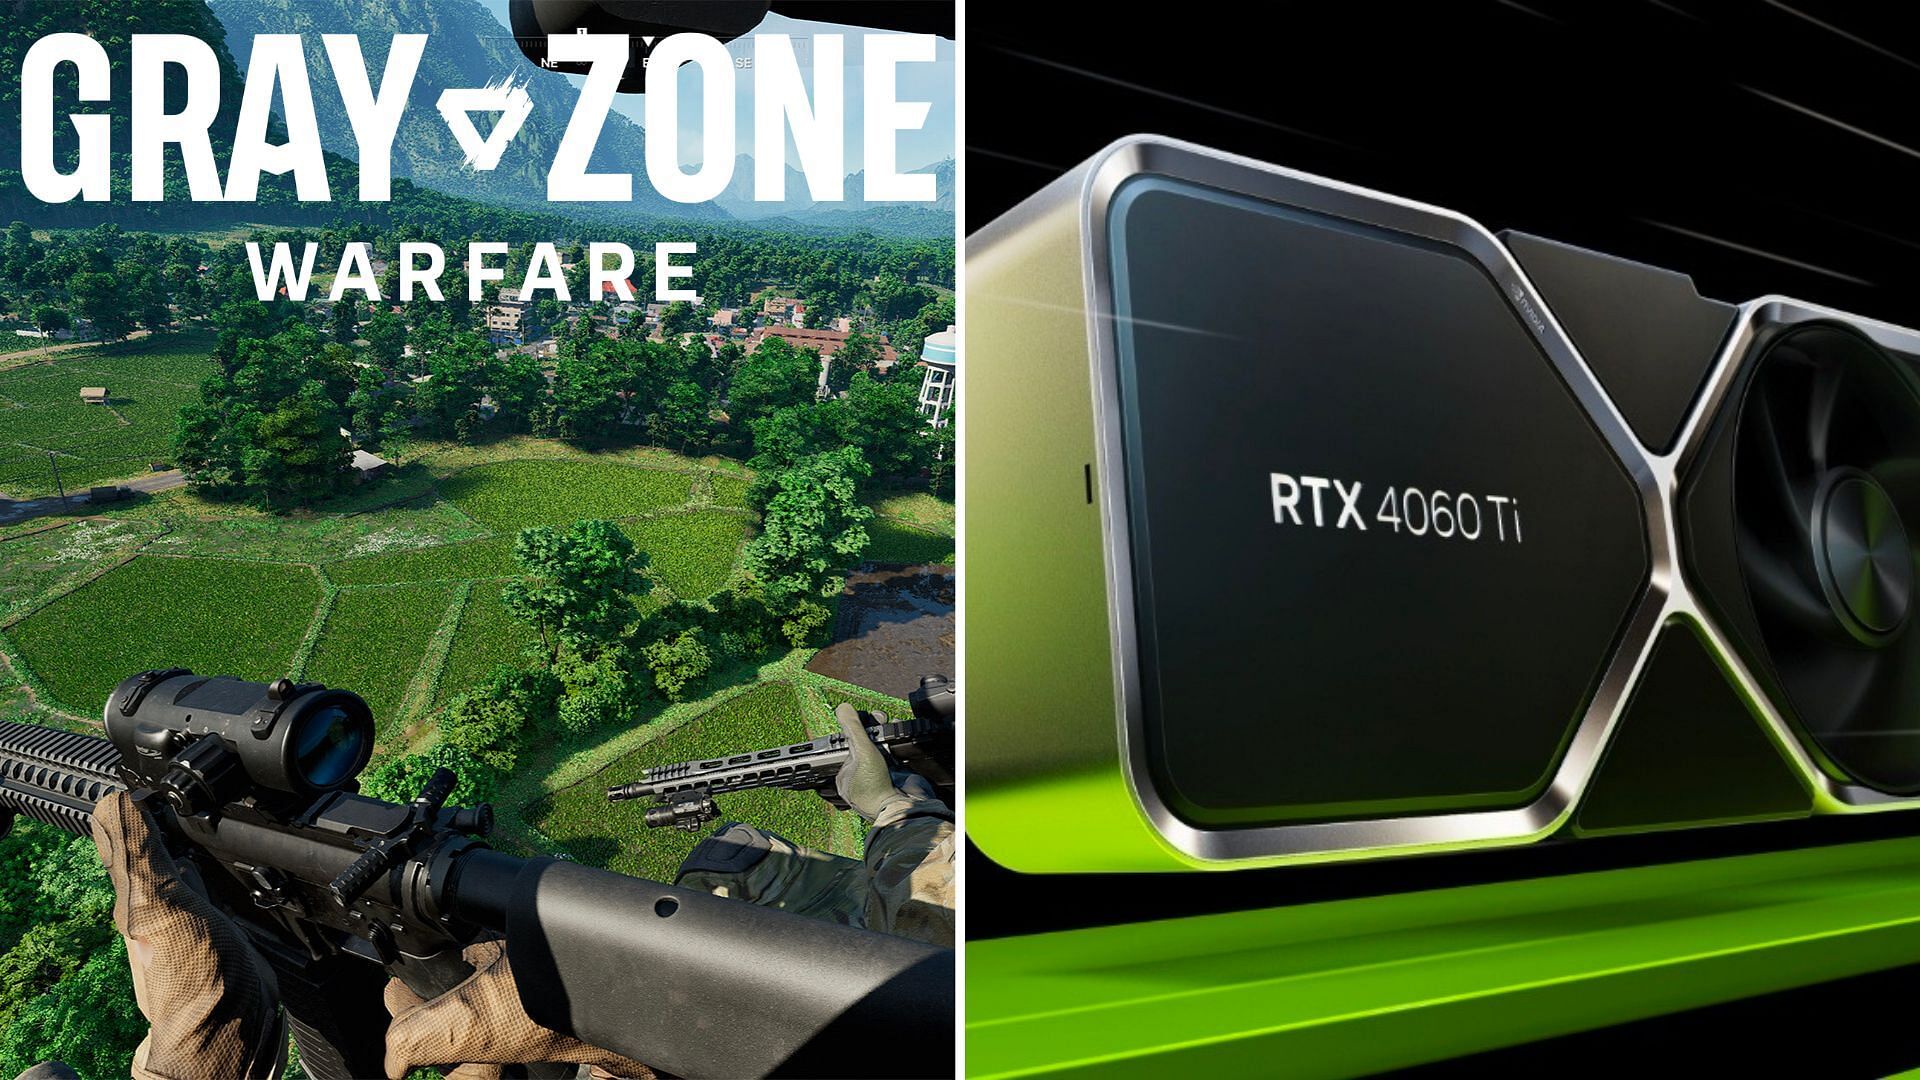 The RTX 4060 and 4060 Ti can handle Gray Zone Warfare without any hiccups (Image via Steam)